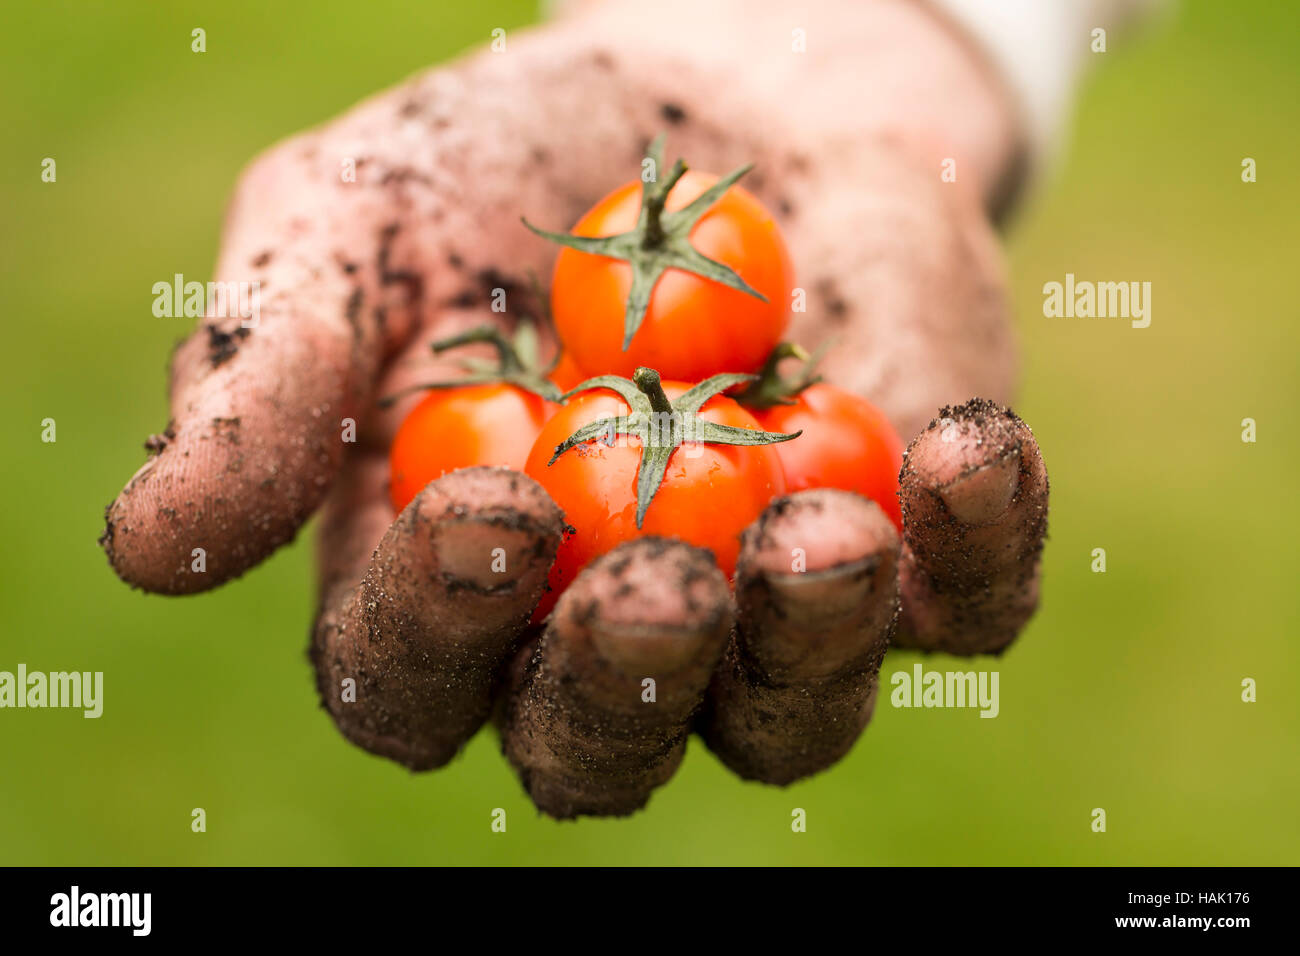 natural food - dirty farmer hand with fresh tomatoes Stock Photo